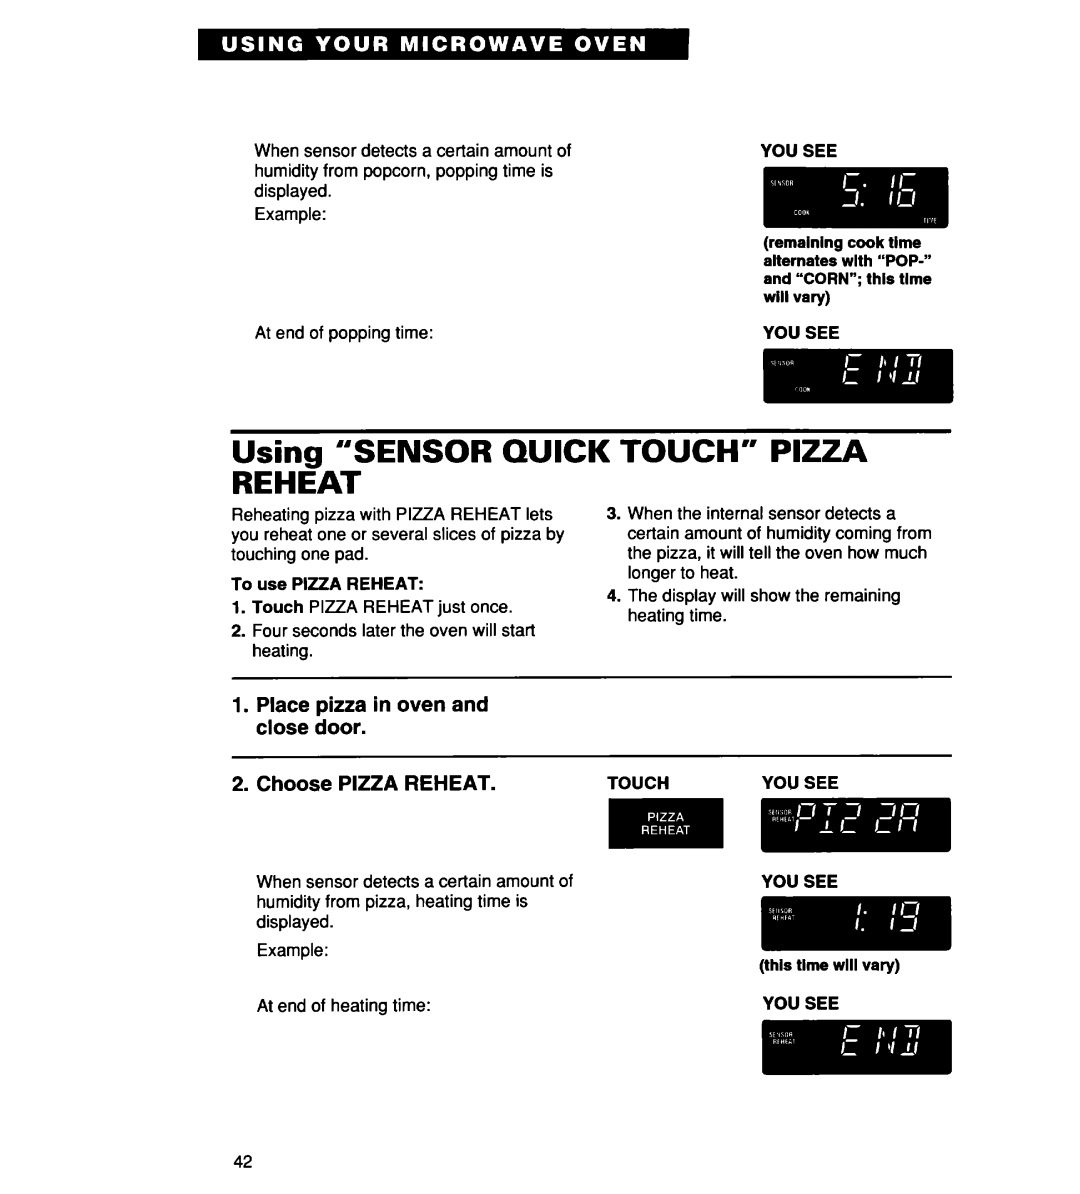 Whirlpool MH7135XE Using “SENSOR QUICK REHEAT, Touch” Pizza, Place pizza in oven and close door, Choose PIZZA REHEAT 